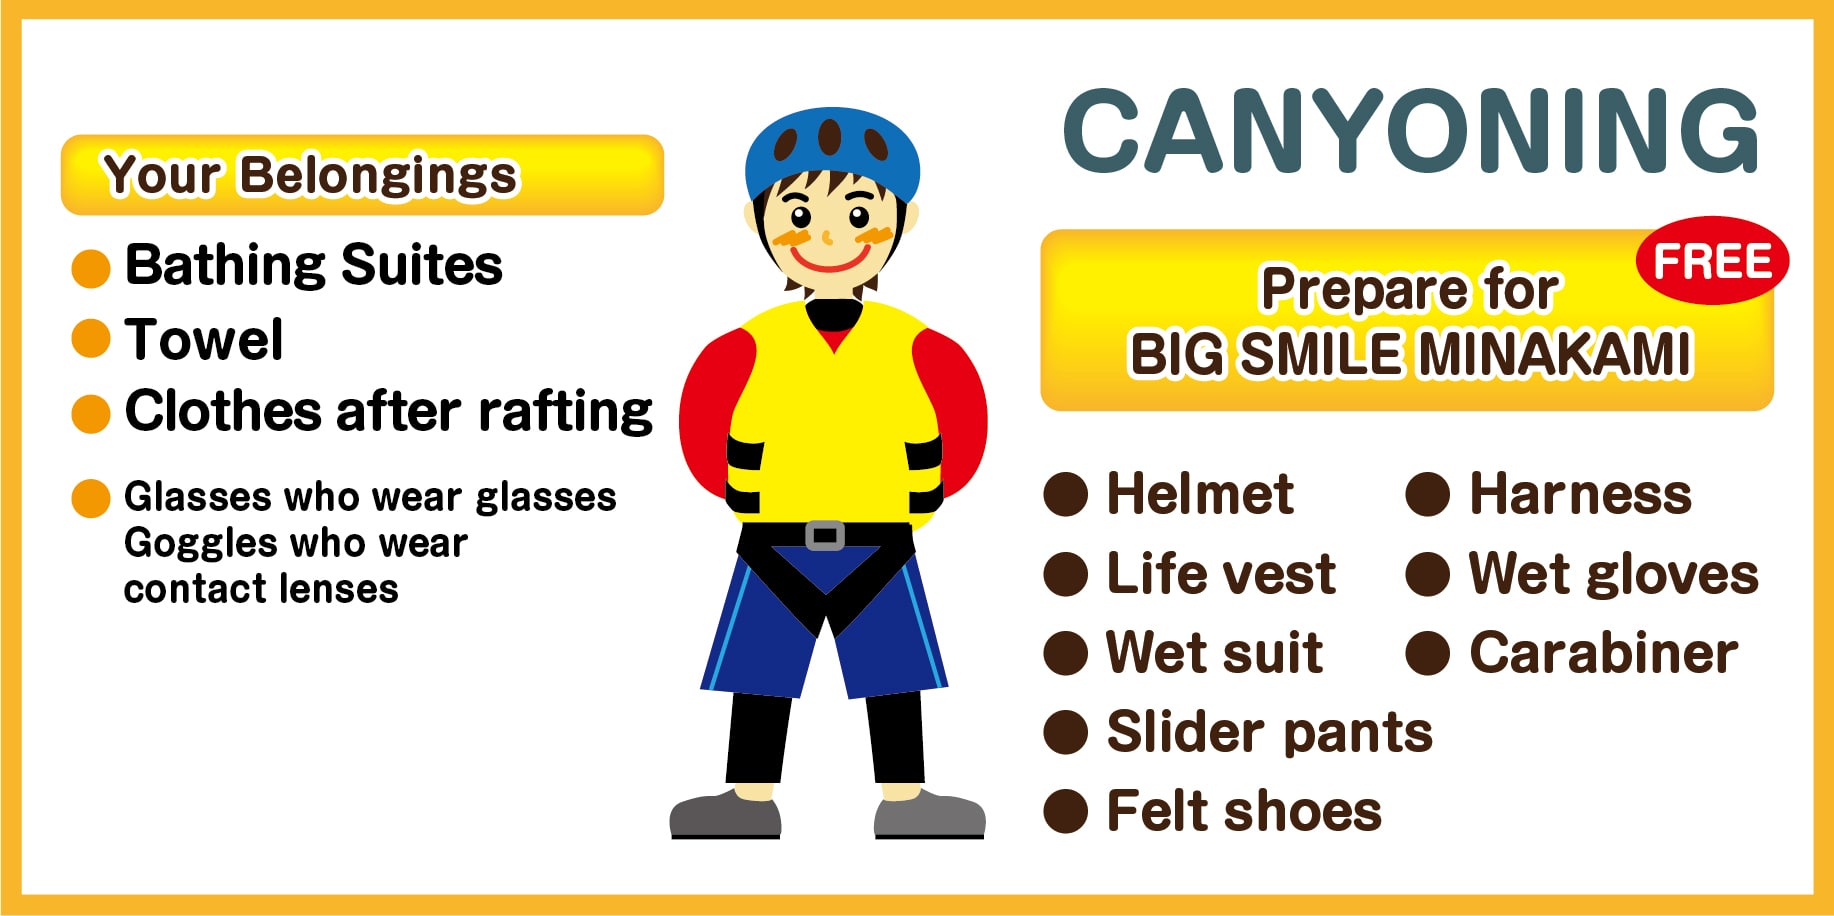 Canyoning clothes